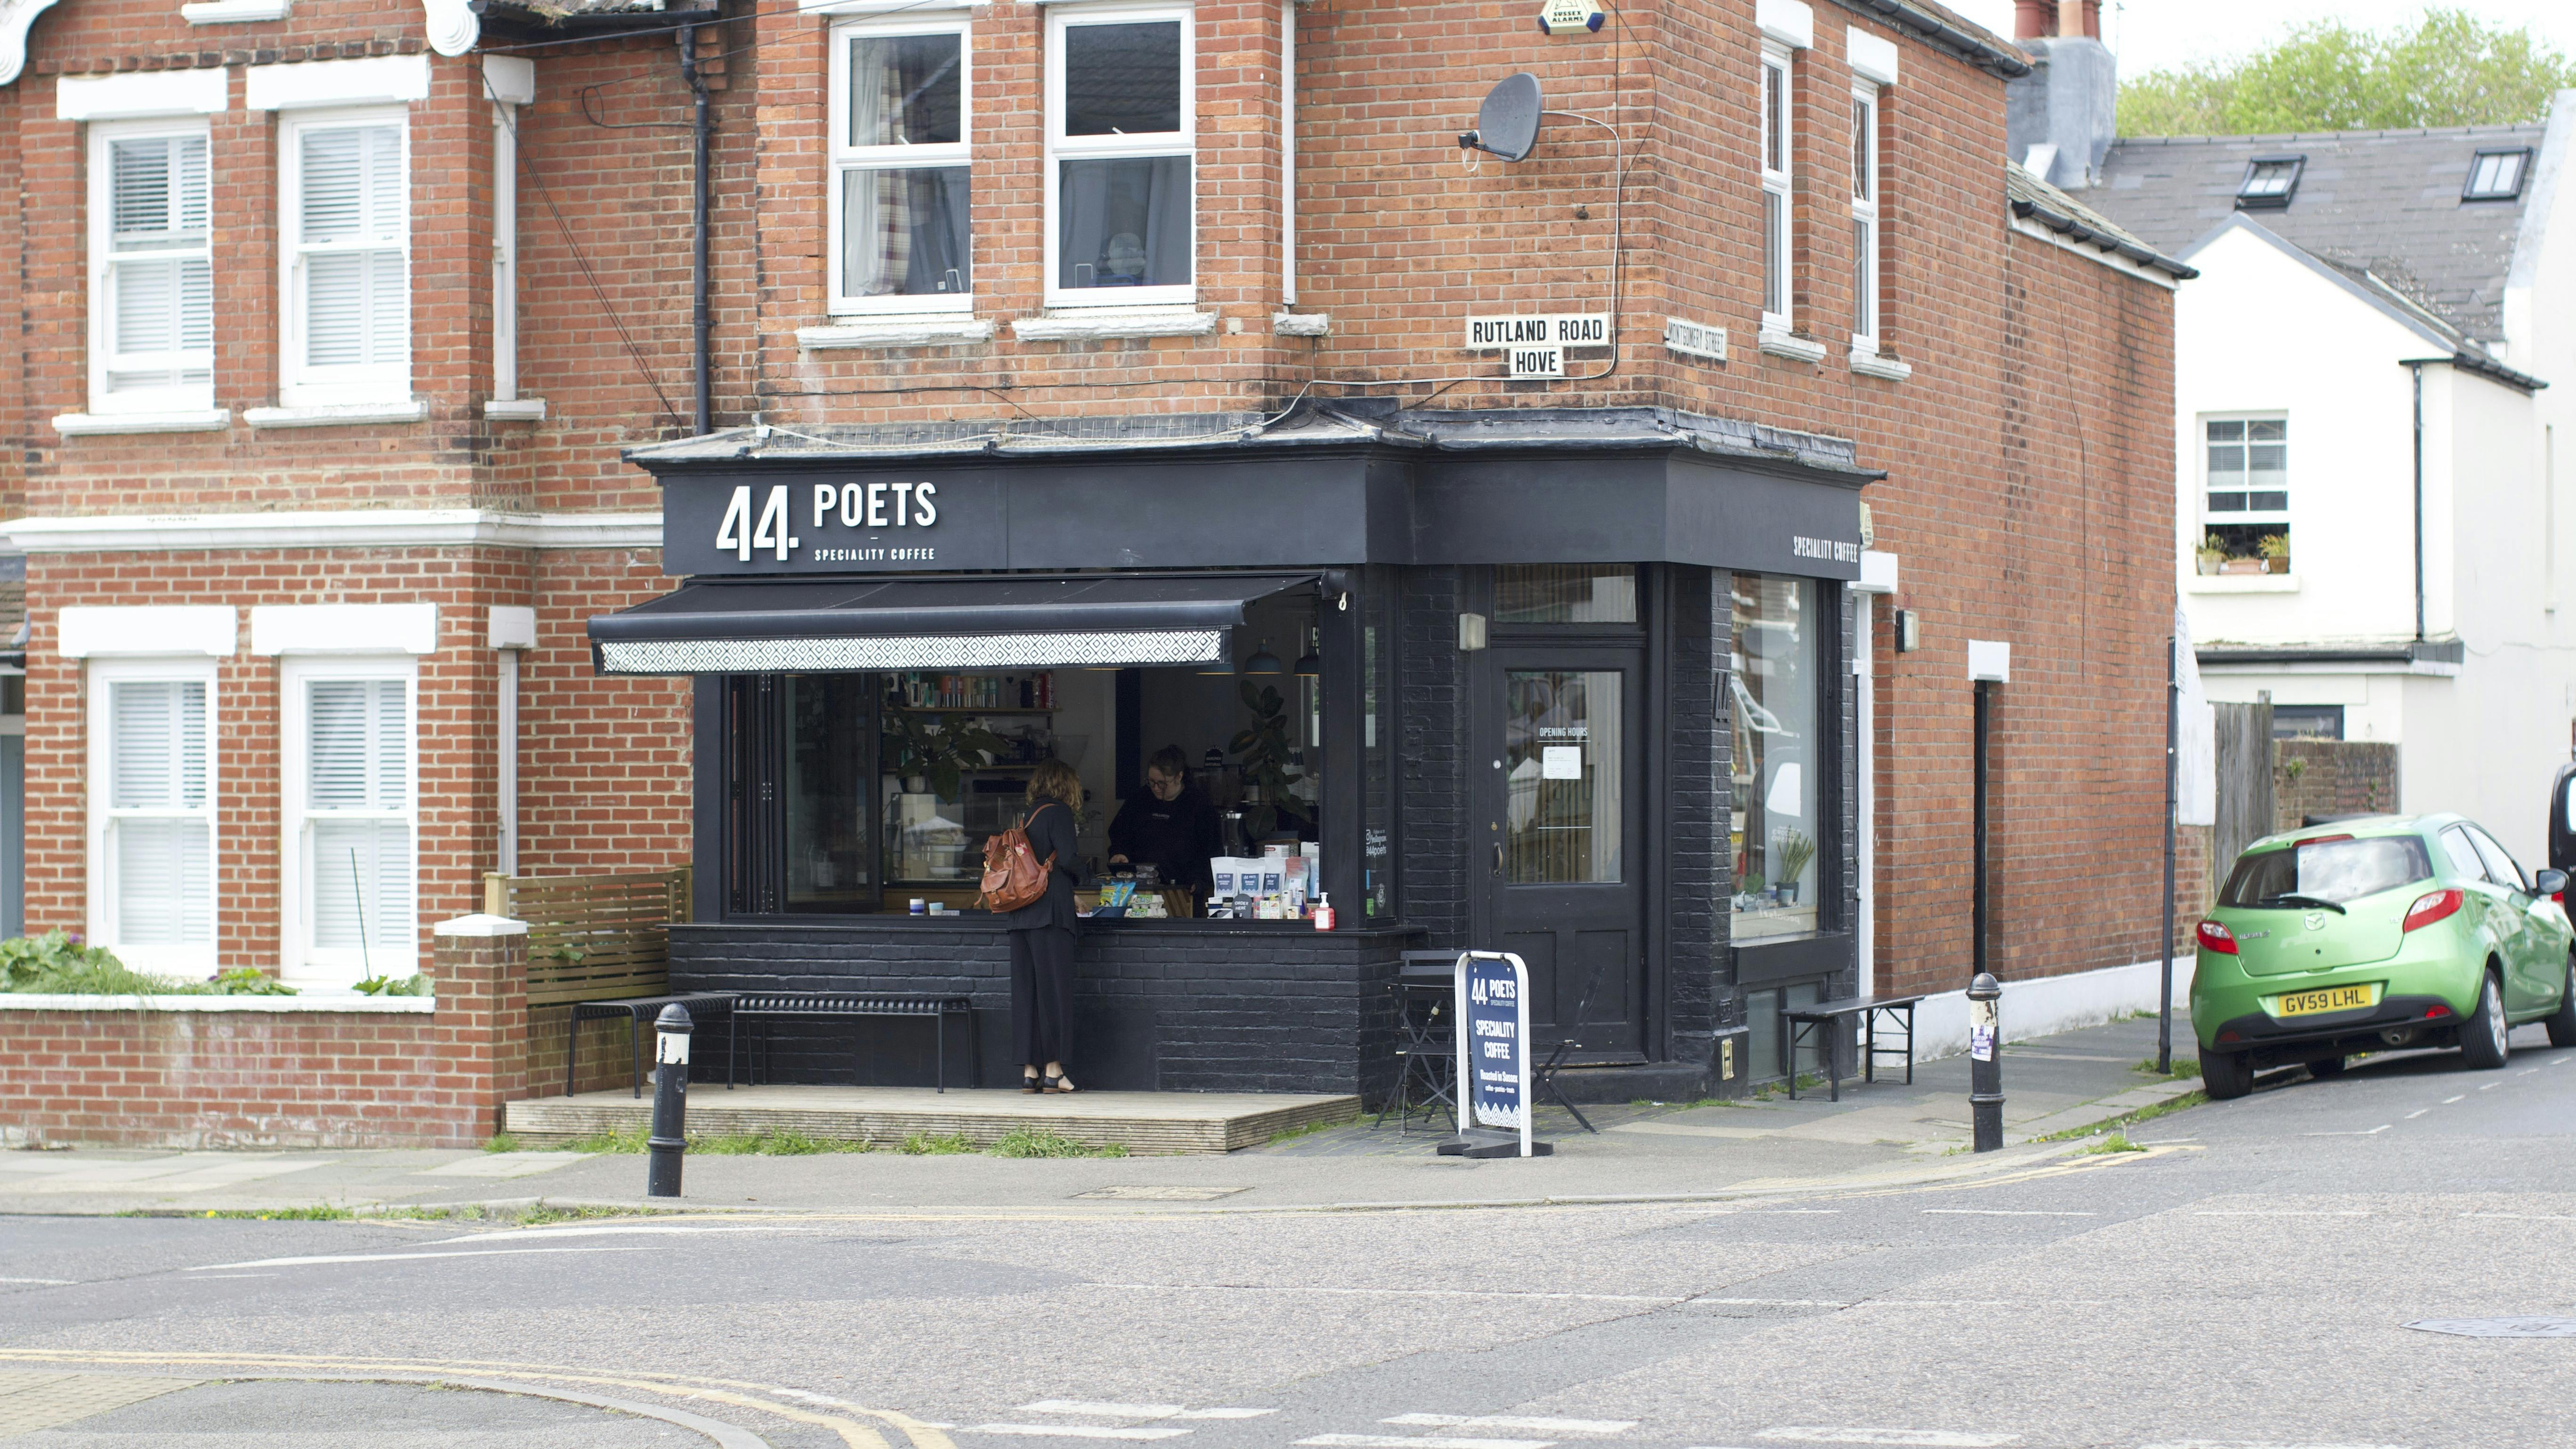 Coffee founded on community | 44 Poets